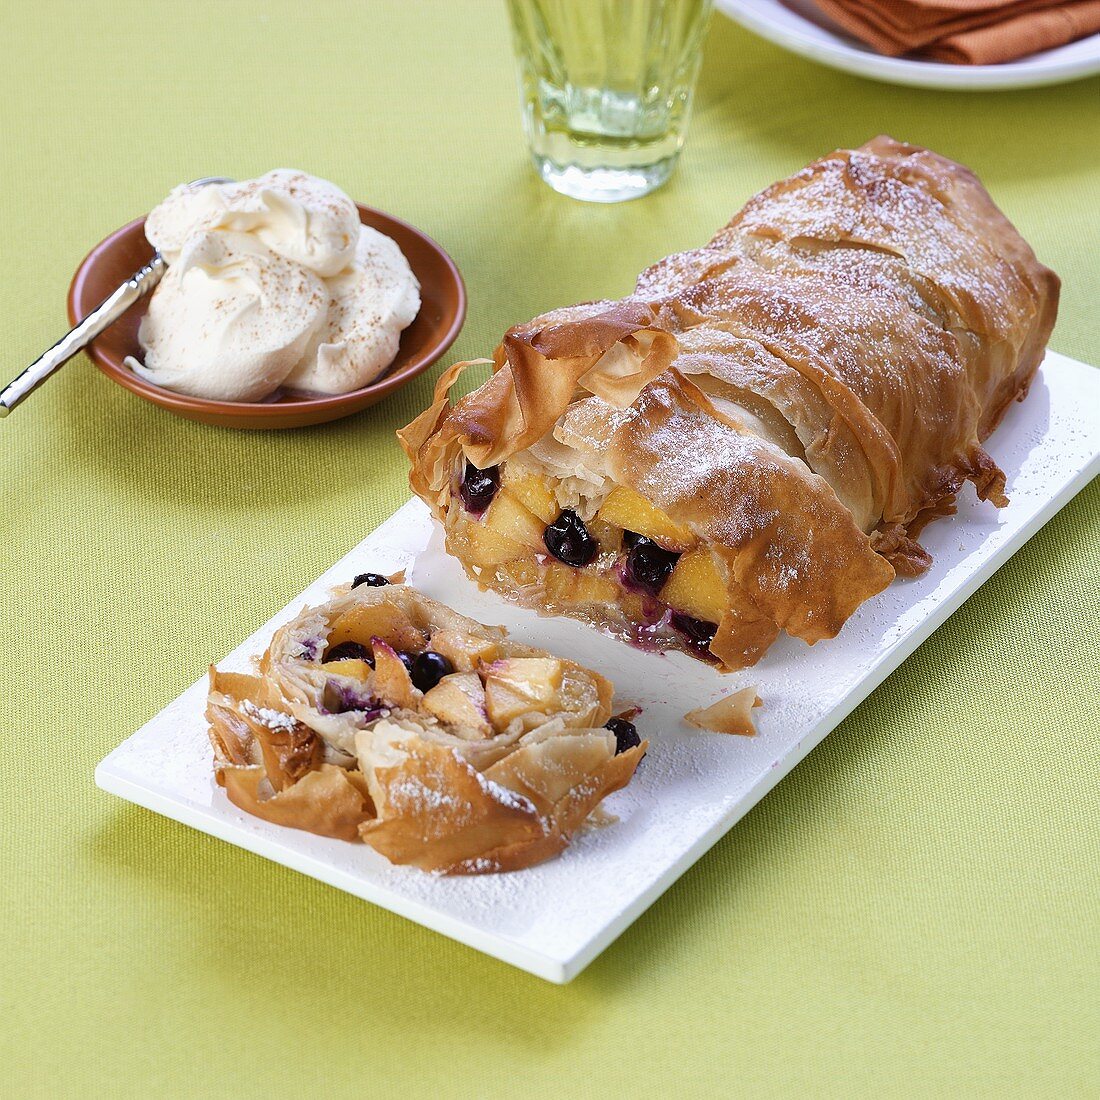 Apricot strudel with cherries